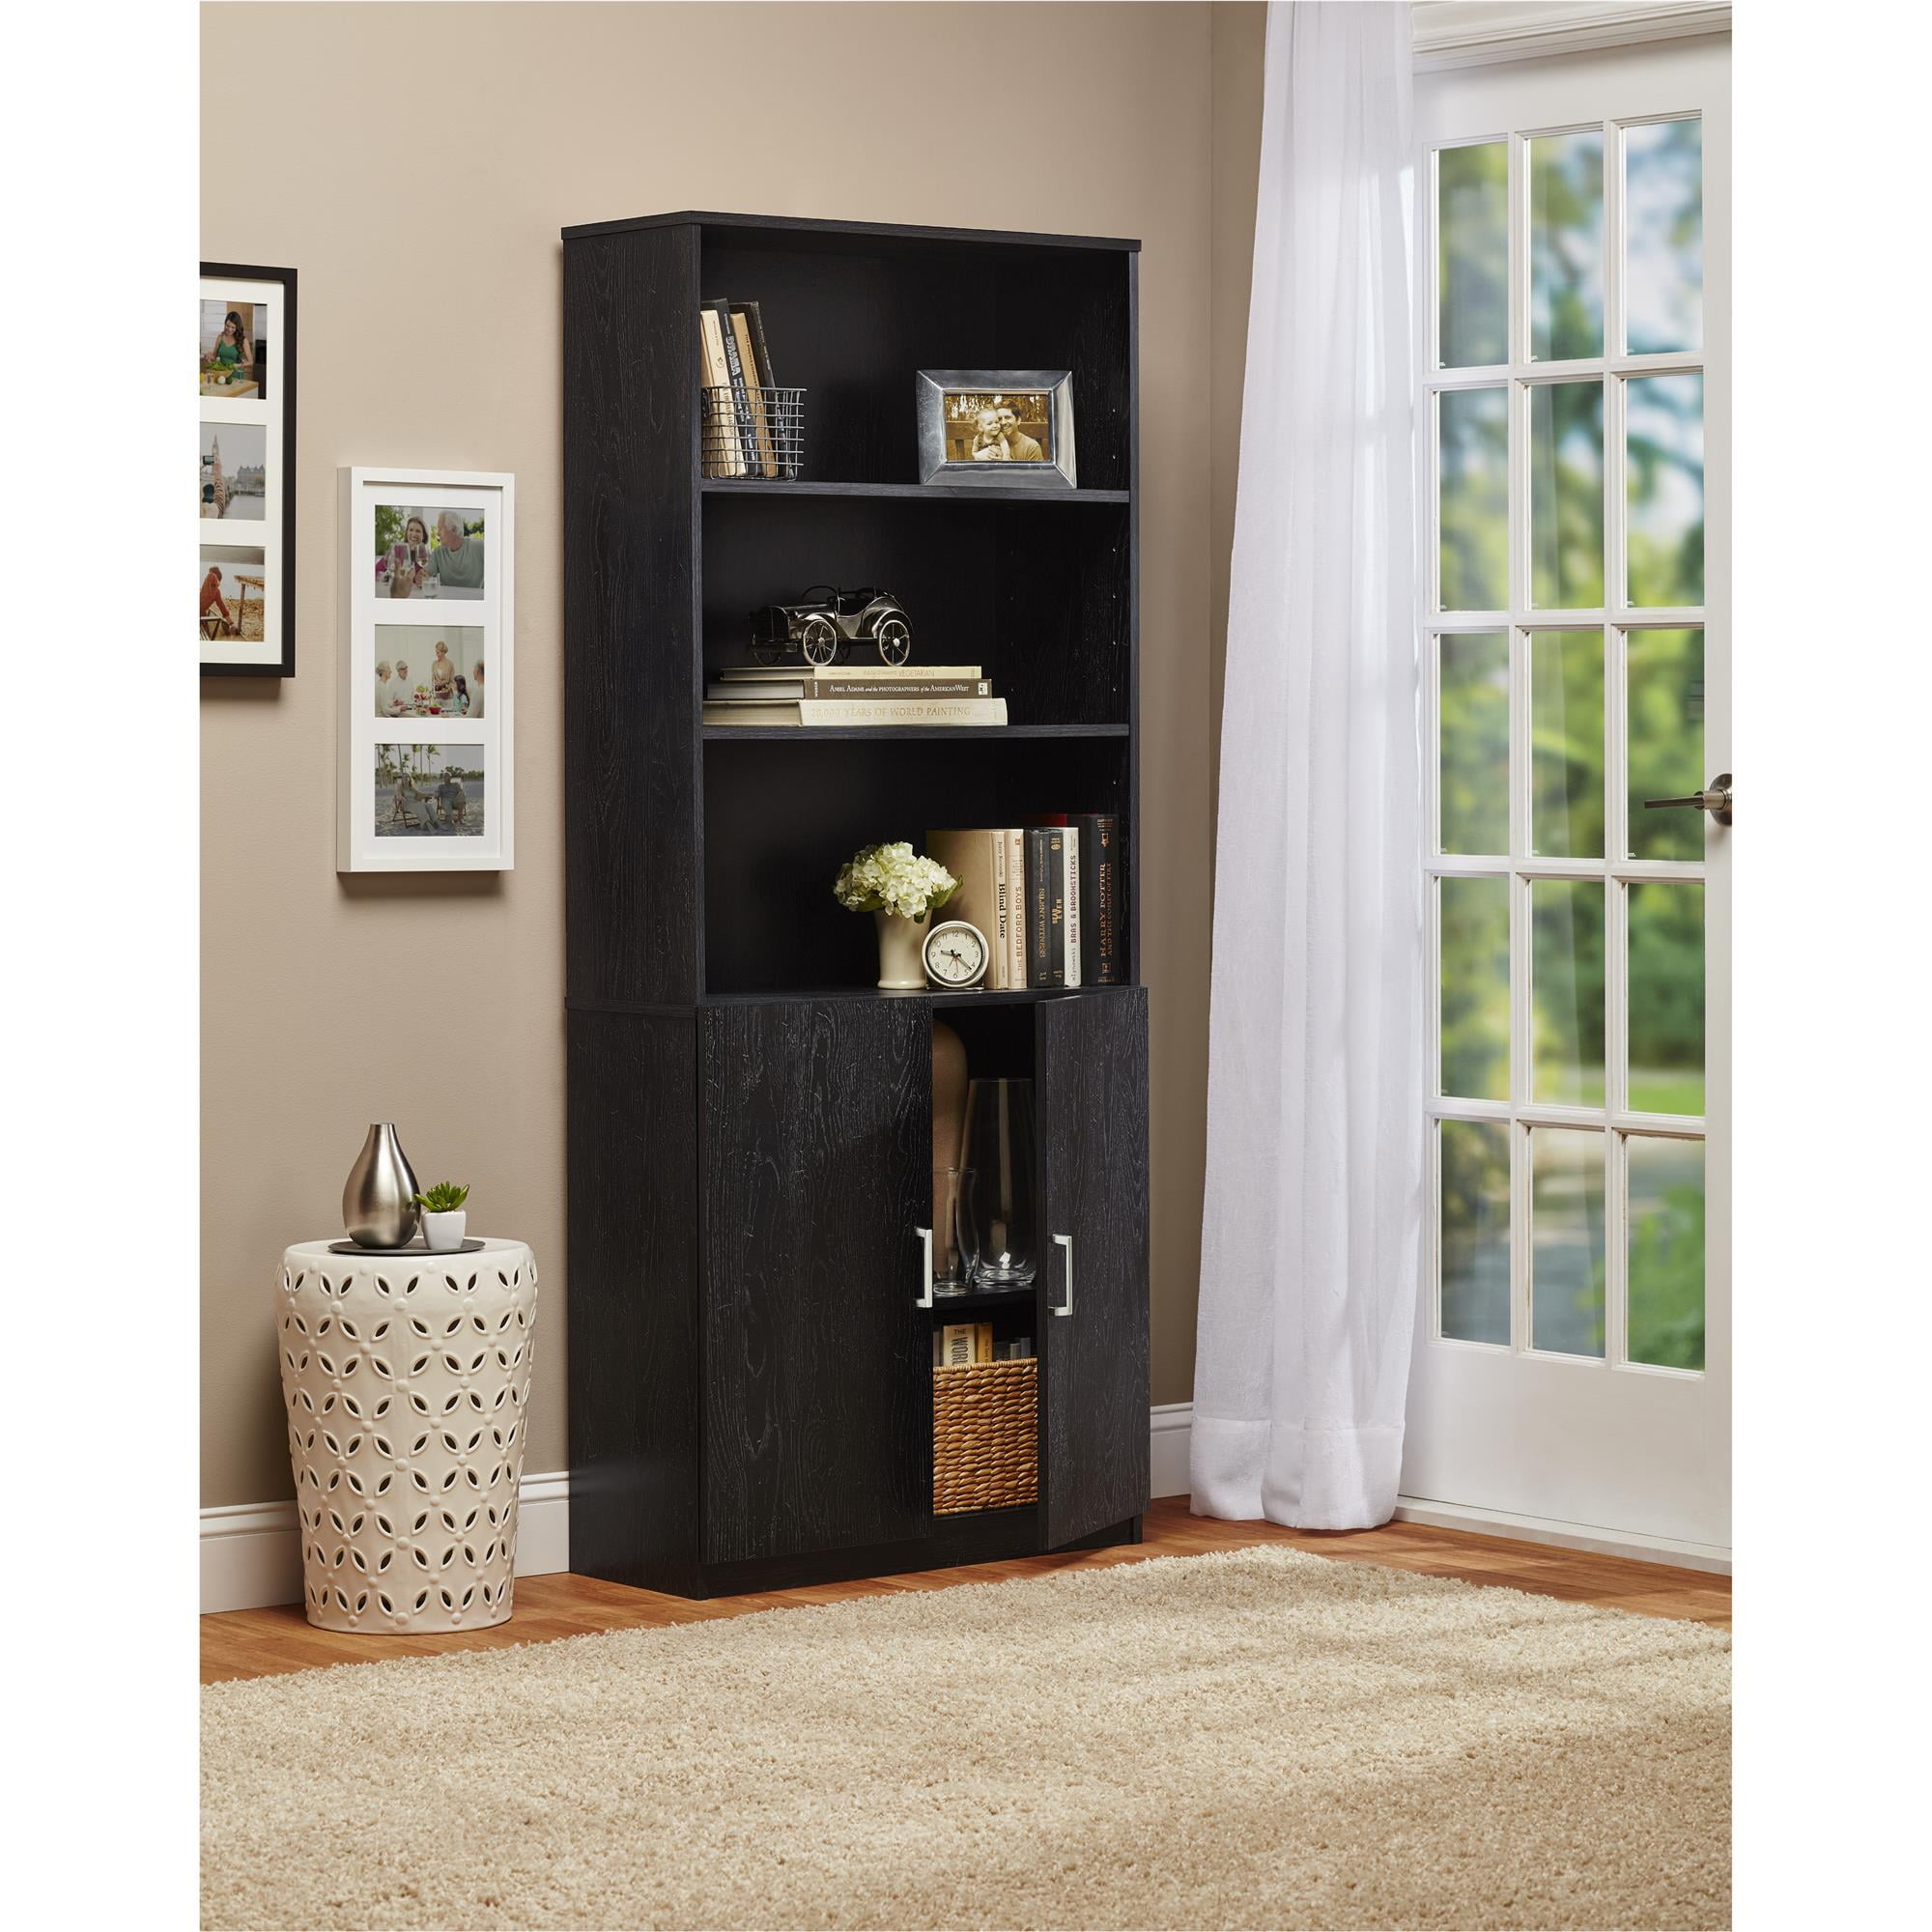 Ameriwood Home 3 Shelf Bookcase With, Ameriwood 3 Shelf Bookcase Assembly Instructions